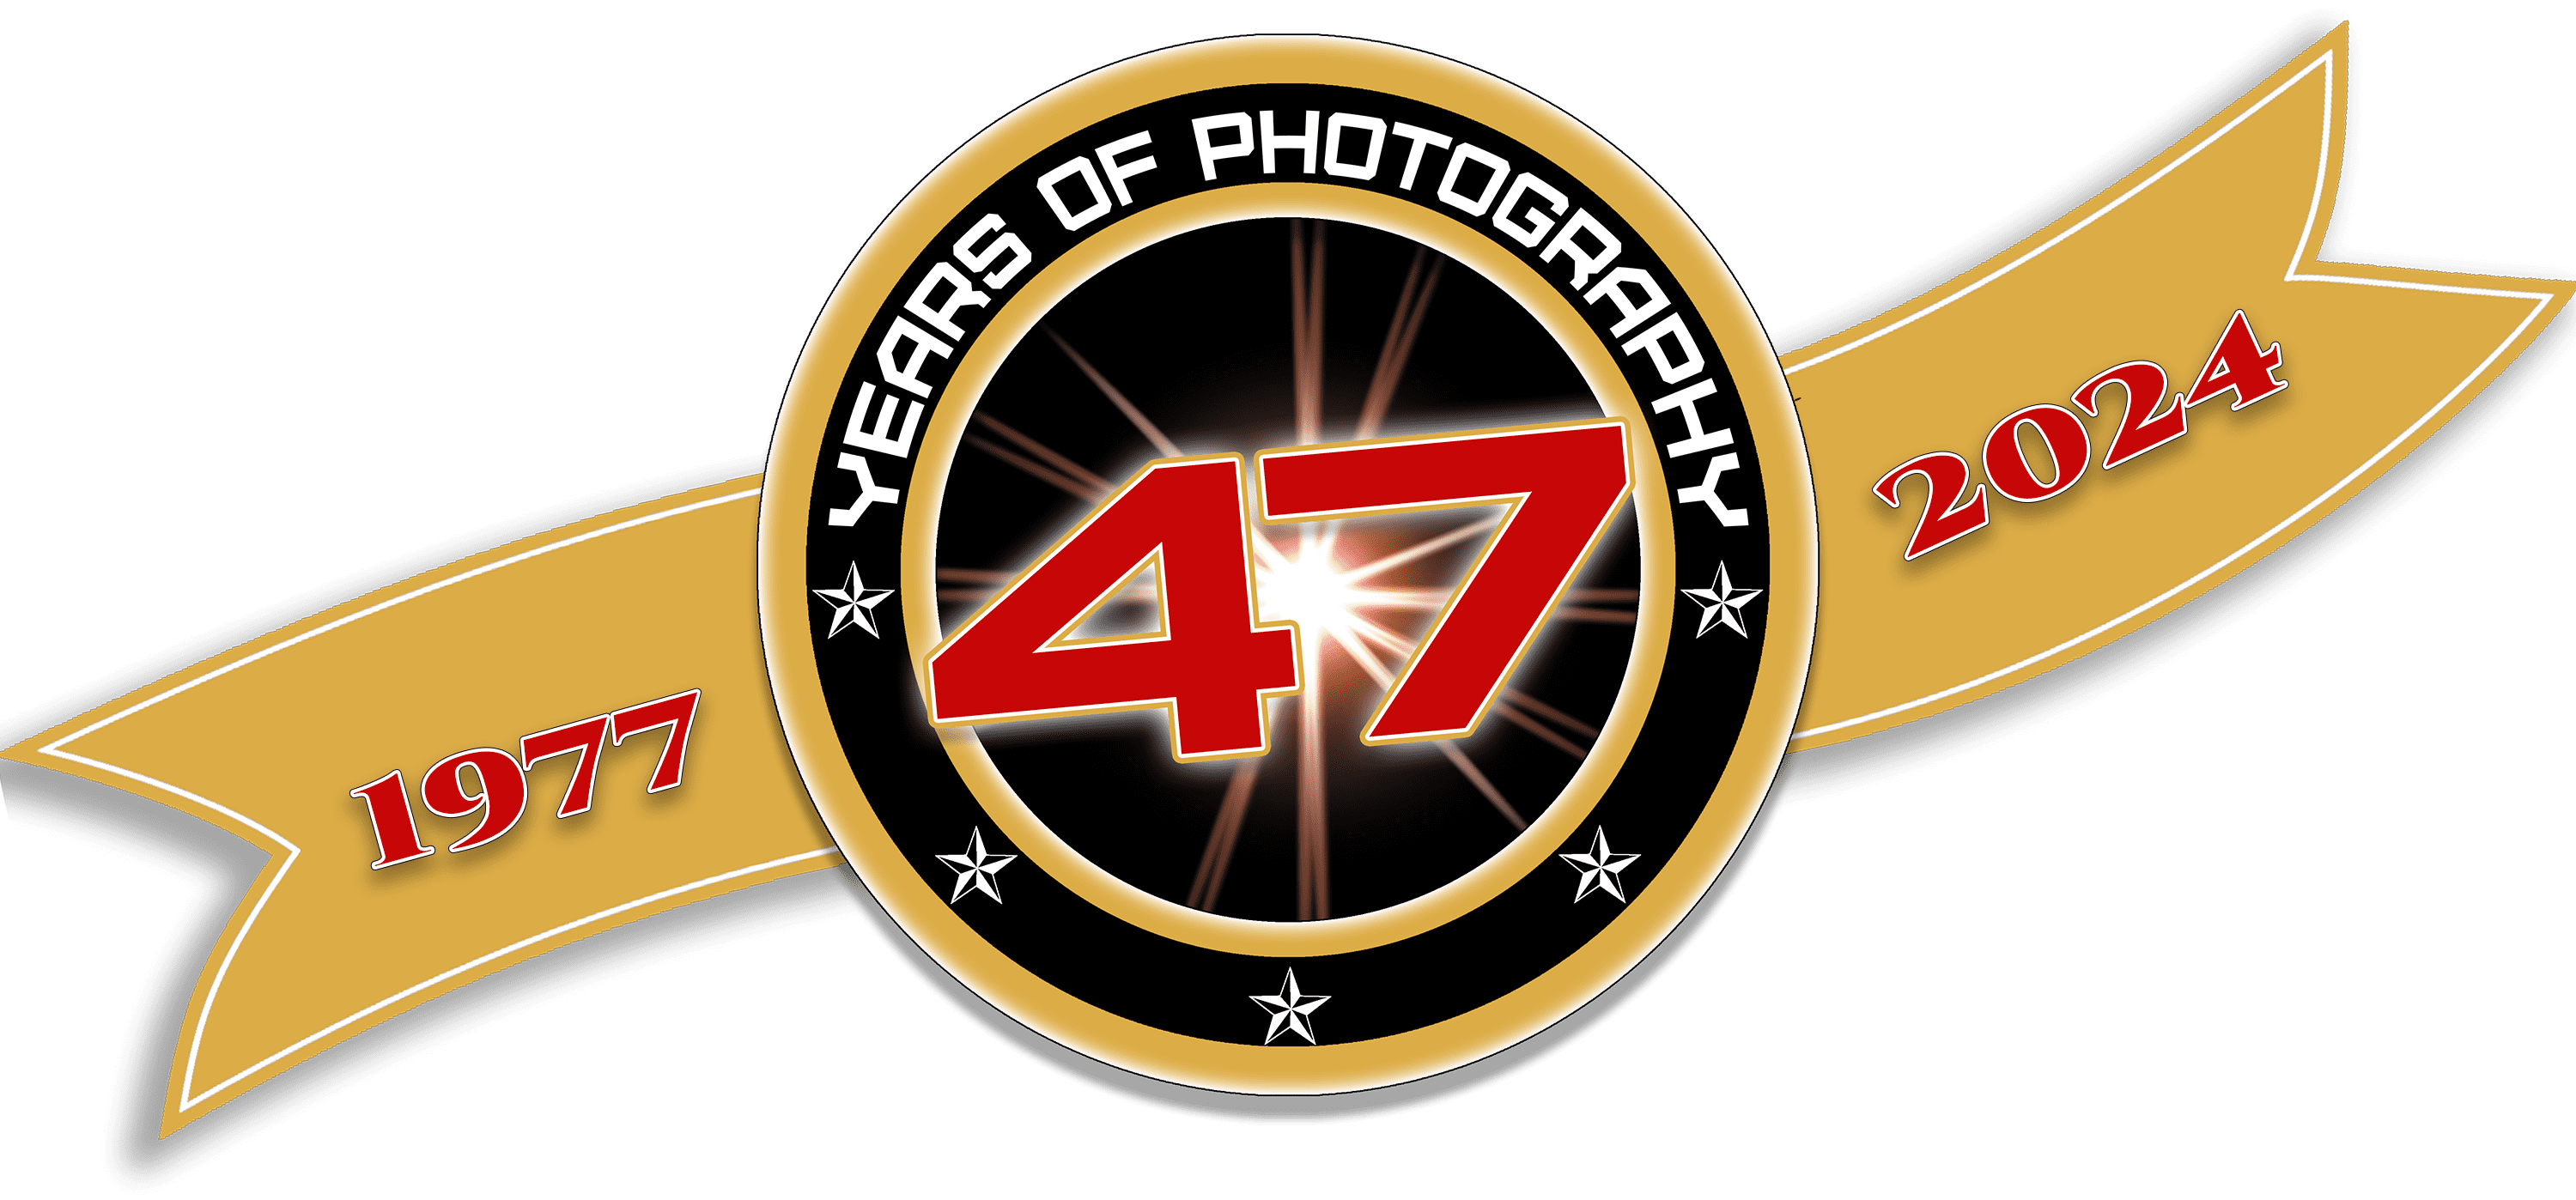 47 years photography experience by ProClicks' owner/photographer Doug Mullis.